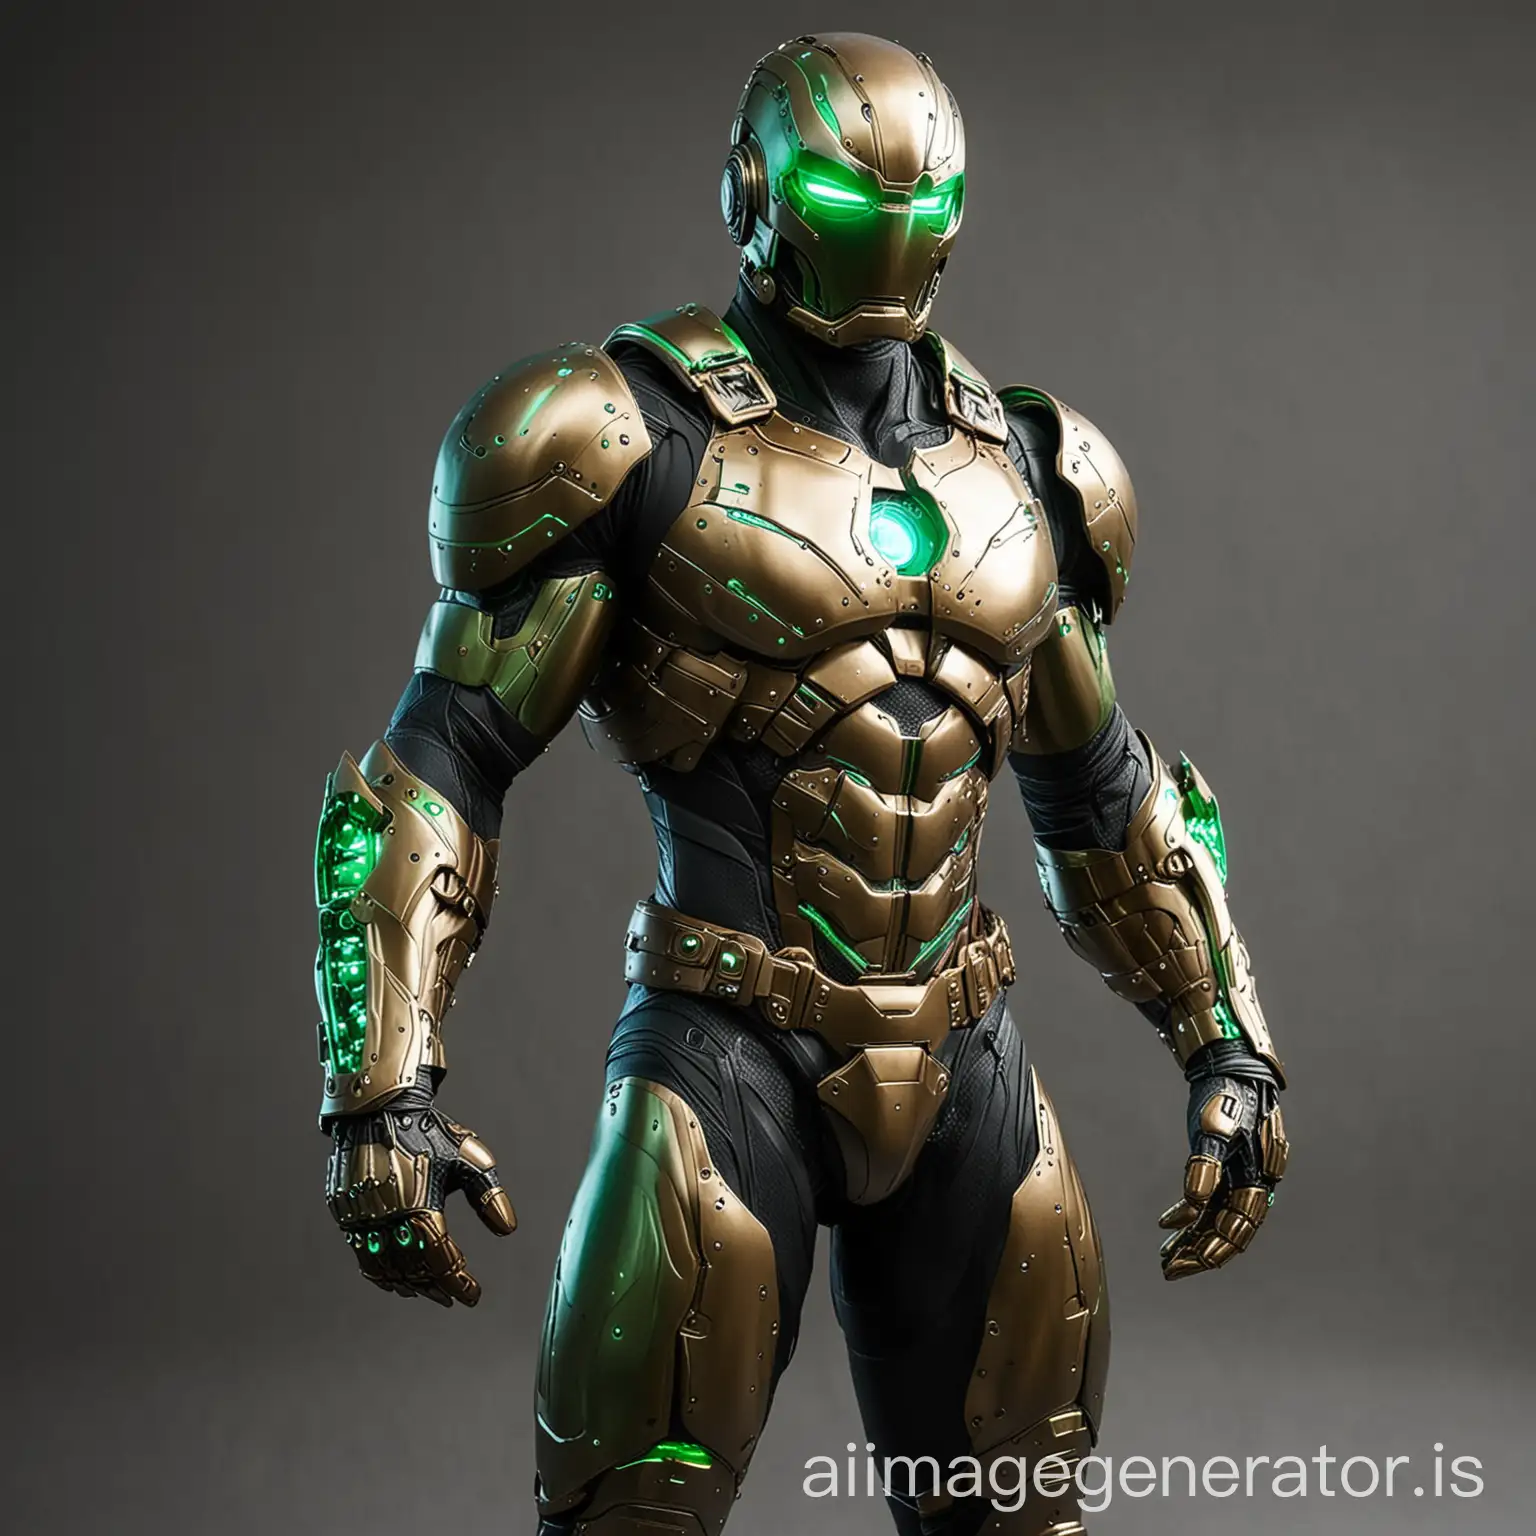 BIG MUSCULAR  6FT 6 TALL,  ARMOUR SUIT ,SUPERHERO WITH WEARING FACE GREEN GLOWING HELMET  EYES SLITS BRONZE SUIT HARNESS AND BRACELETT HI TECH SUIT WITH ARMS OUT BRONZE ENERGY PULSE